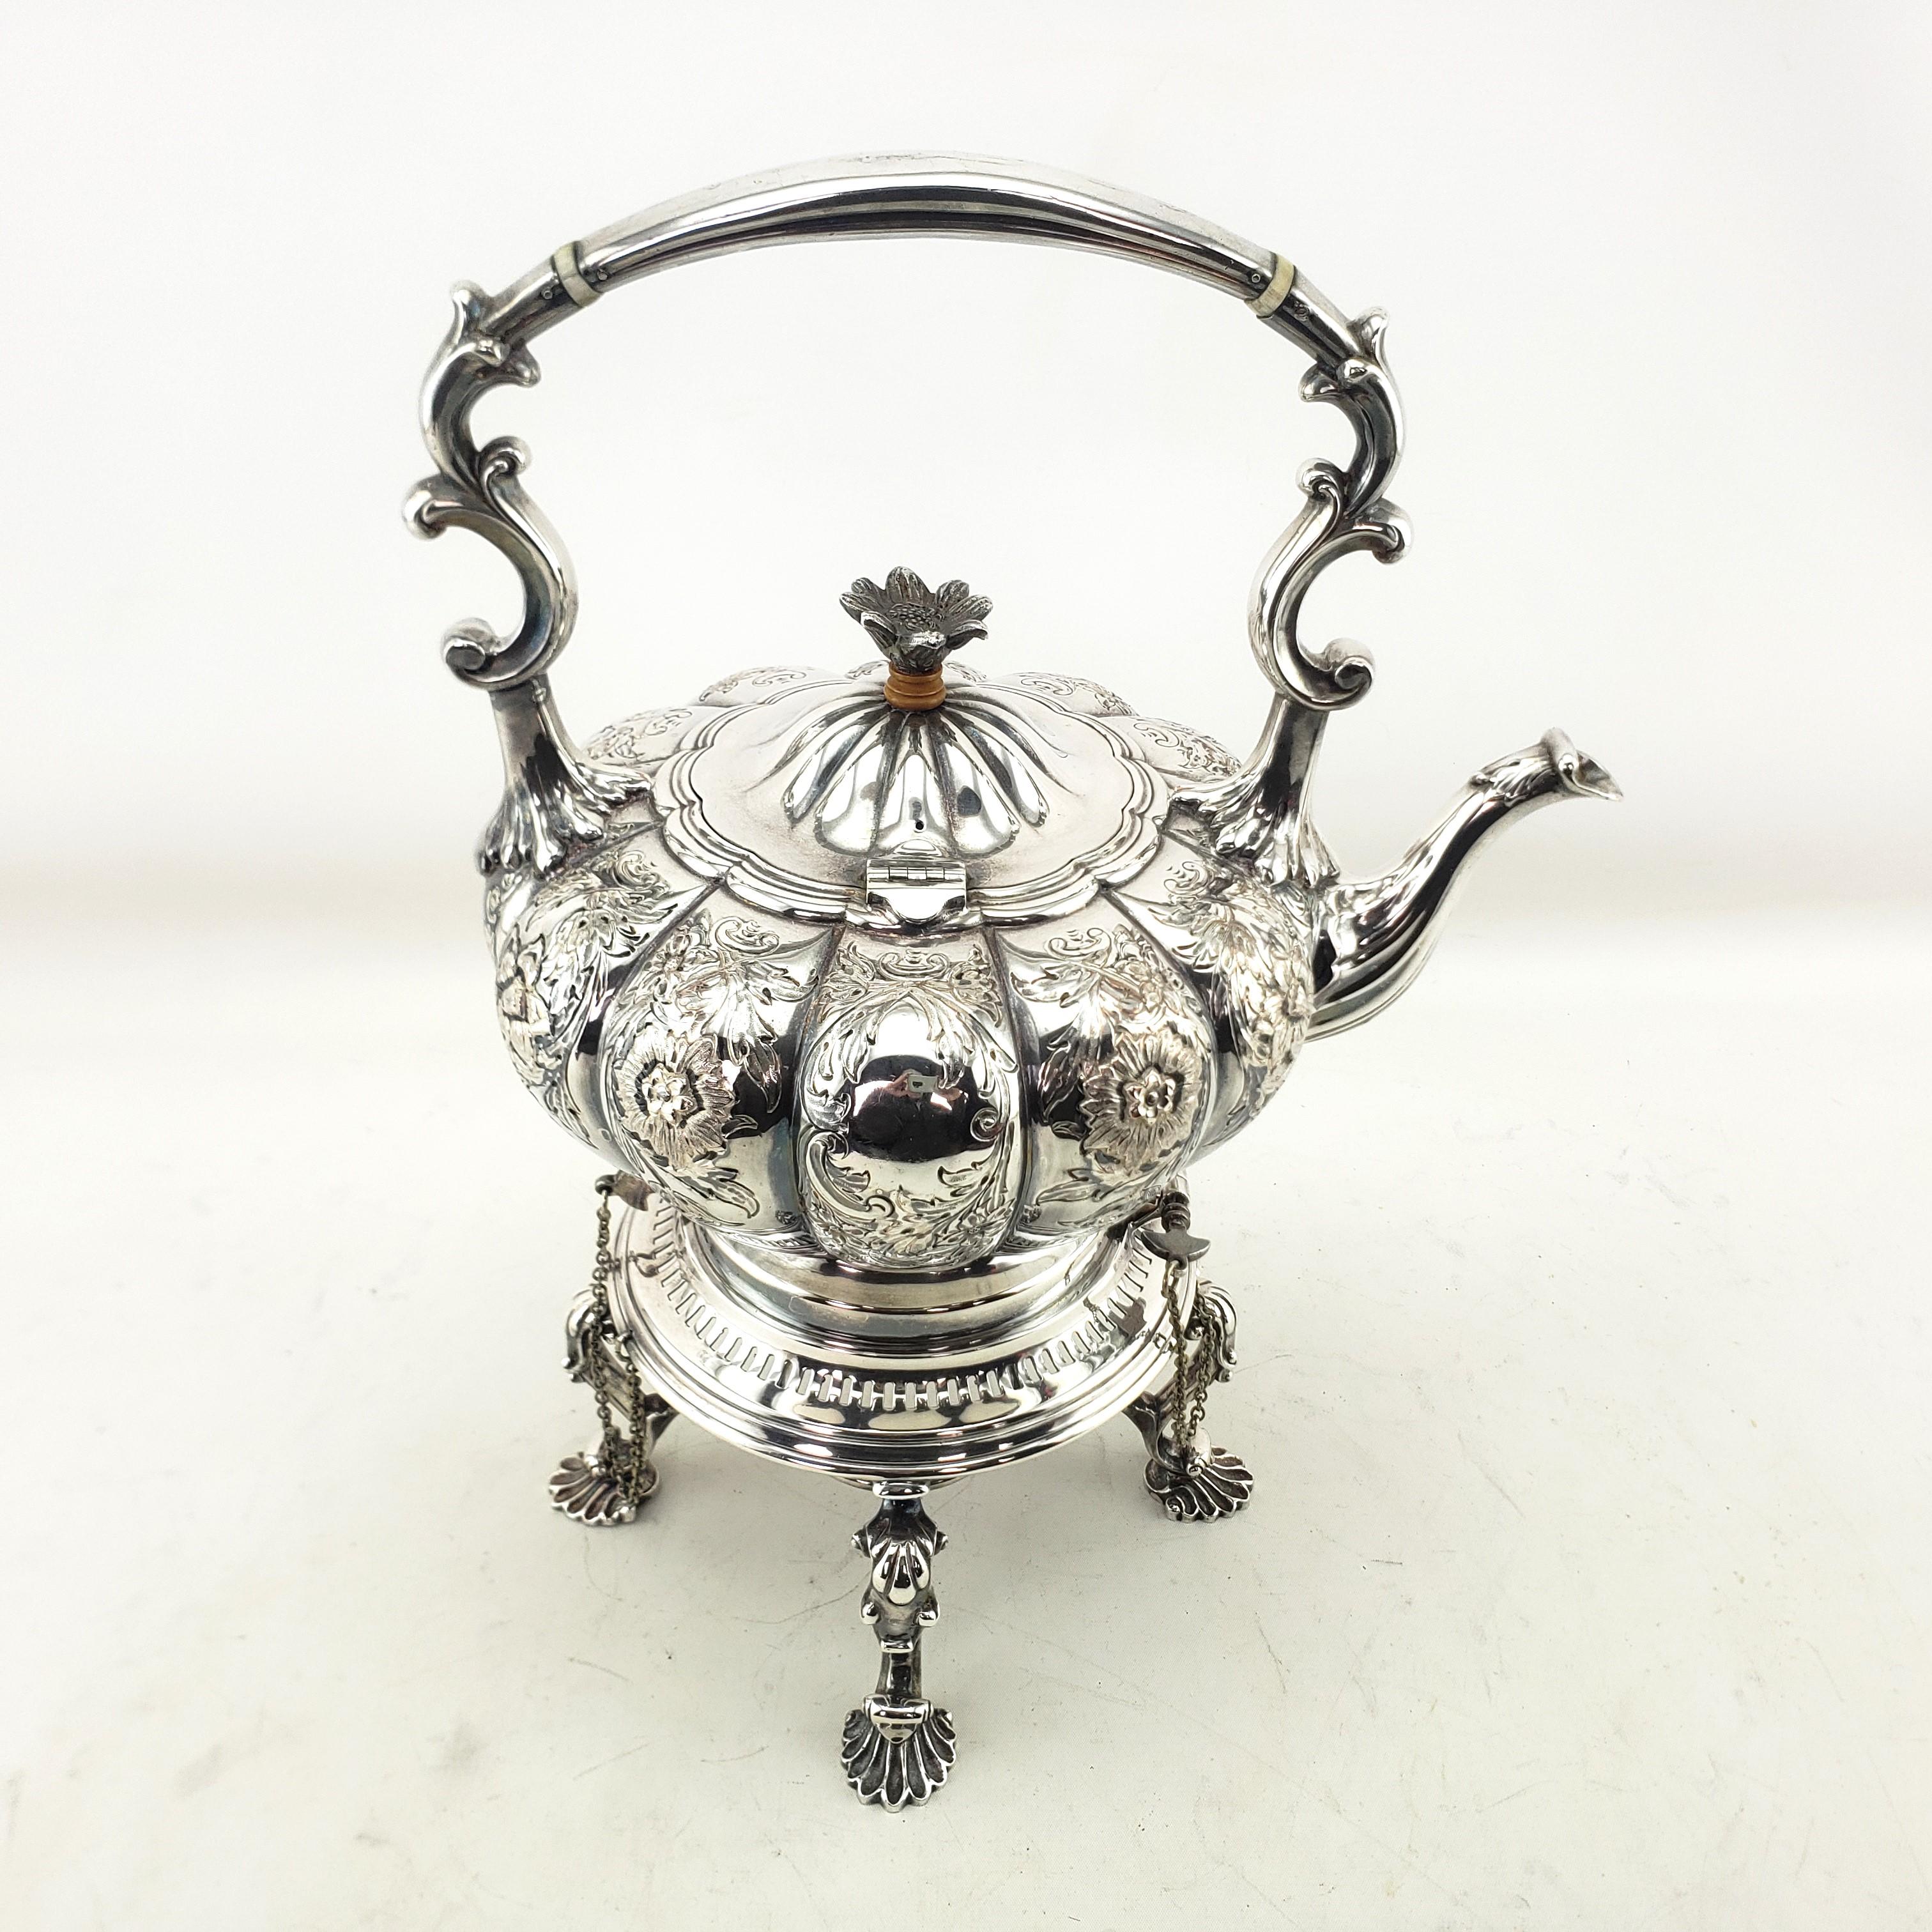 This antique hot water tipping kettle is unsigned by a maker, but originated from England and dates to approximately 1900 and done in an Art Nouveau style. The kettle and stand are done in silver plate with metal chains and pins. The kettle is